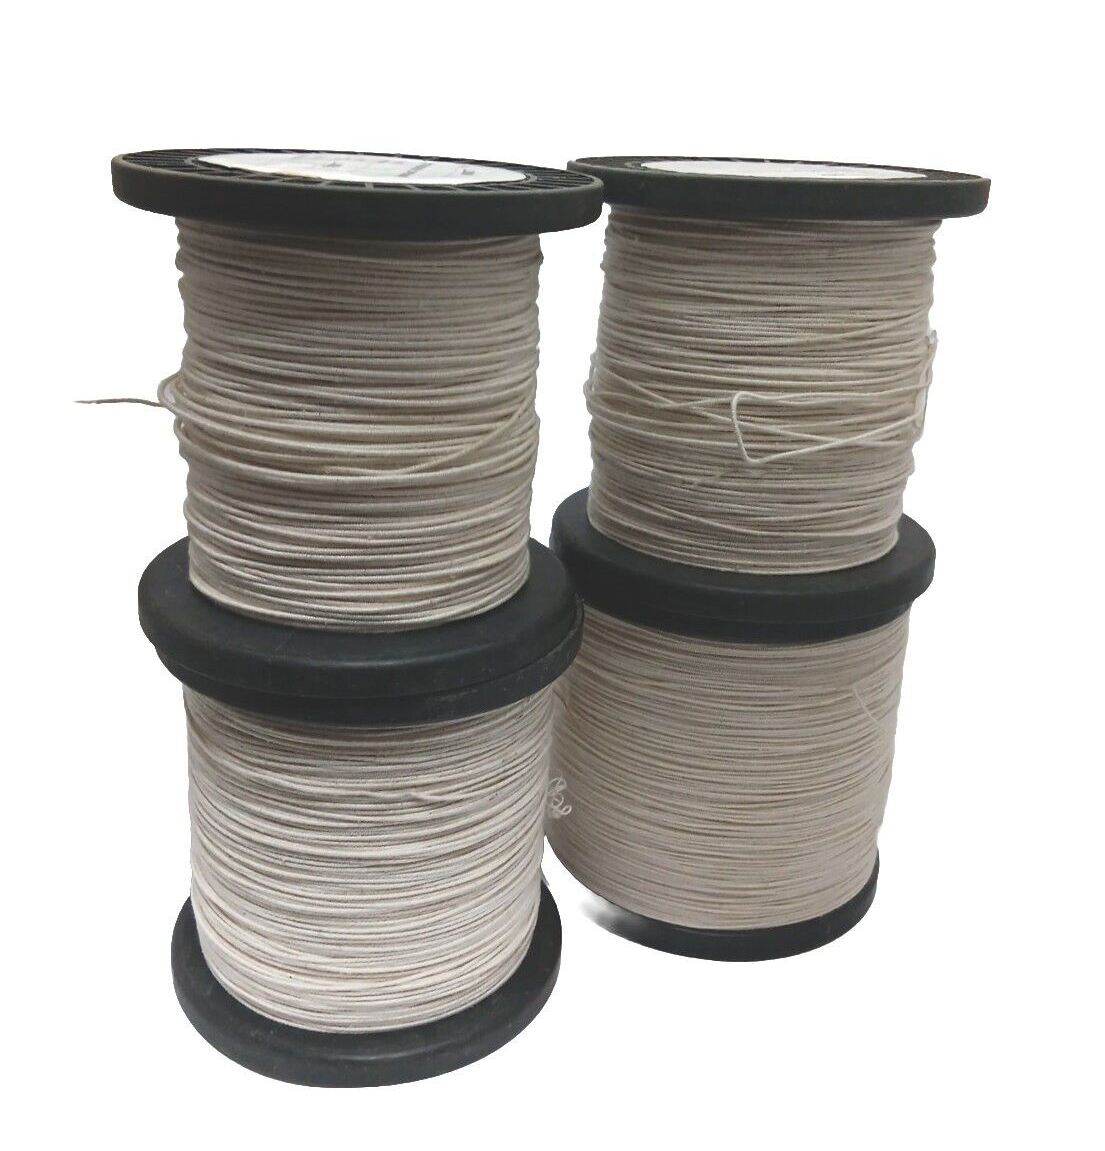 Kg 0.45mm Double Cotton Covered Copper Craft Wire